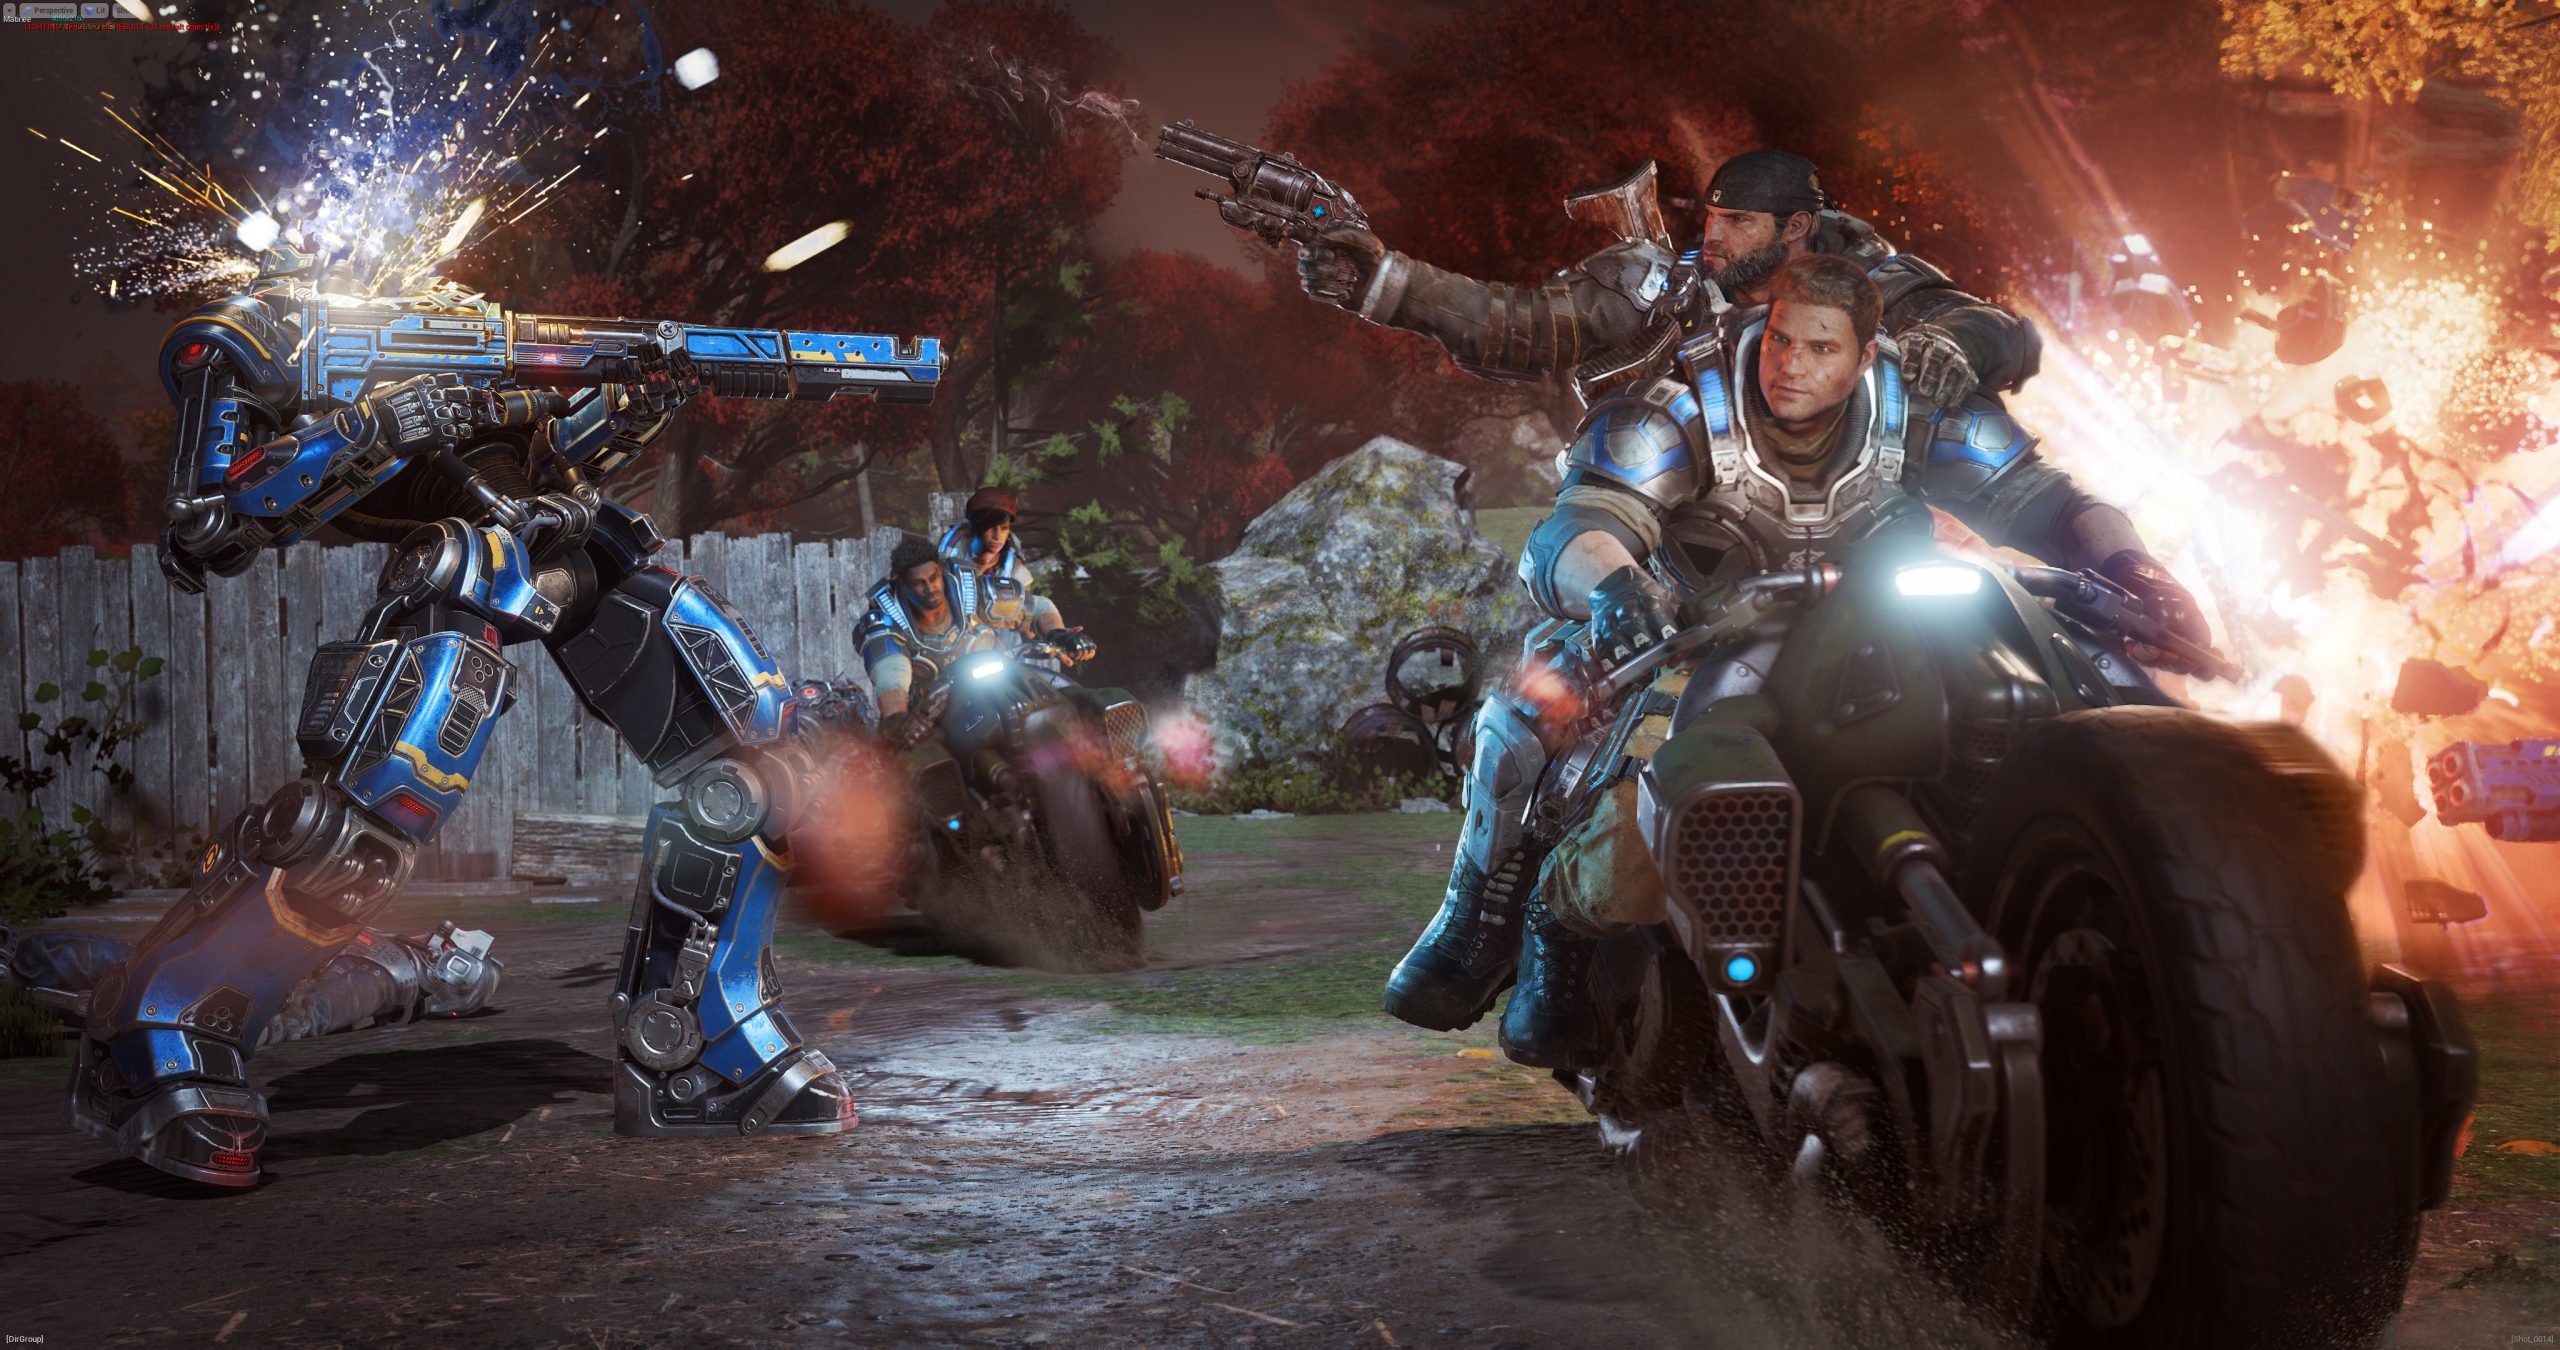 Gears of War 4's campaign will have split-screen co-op on PC